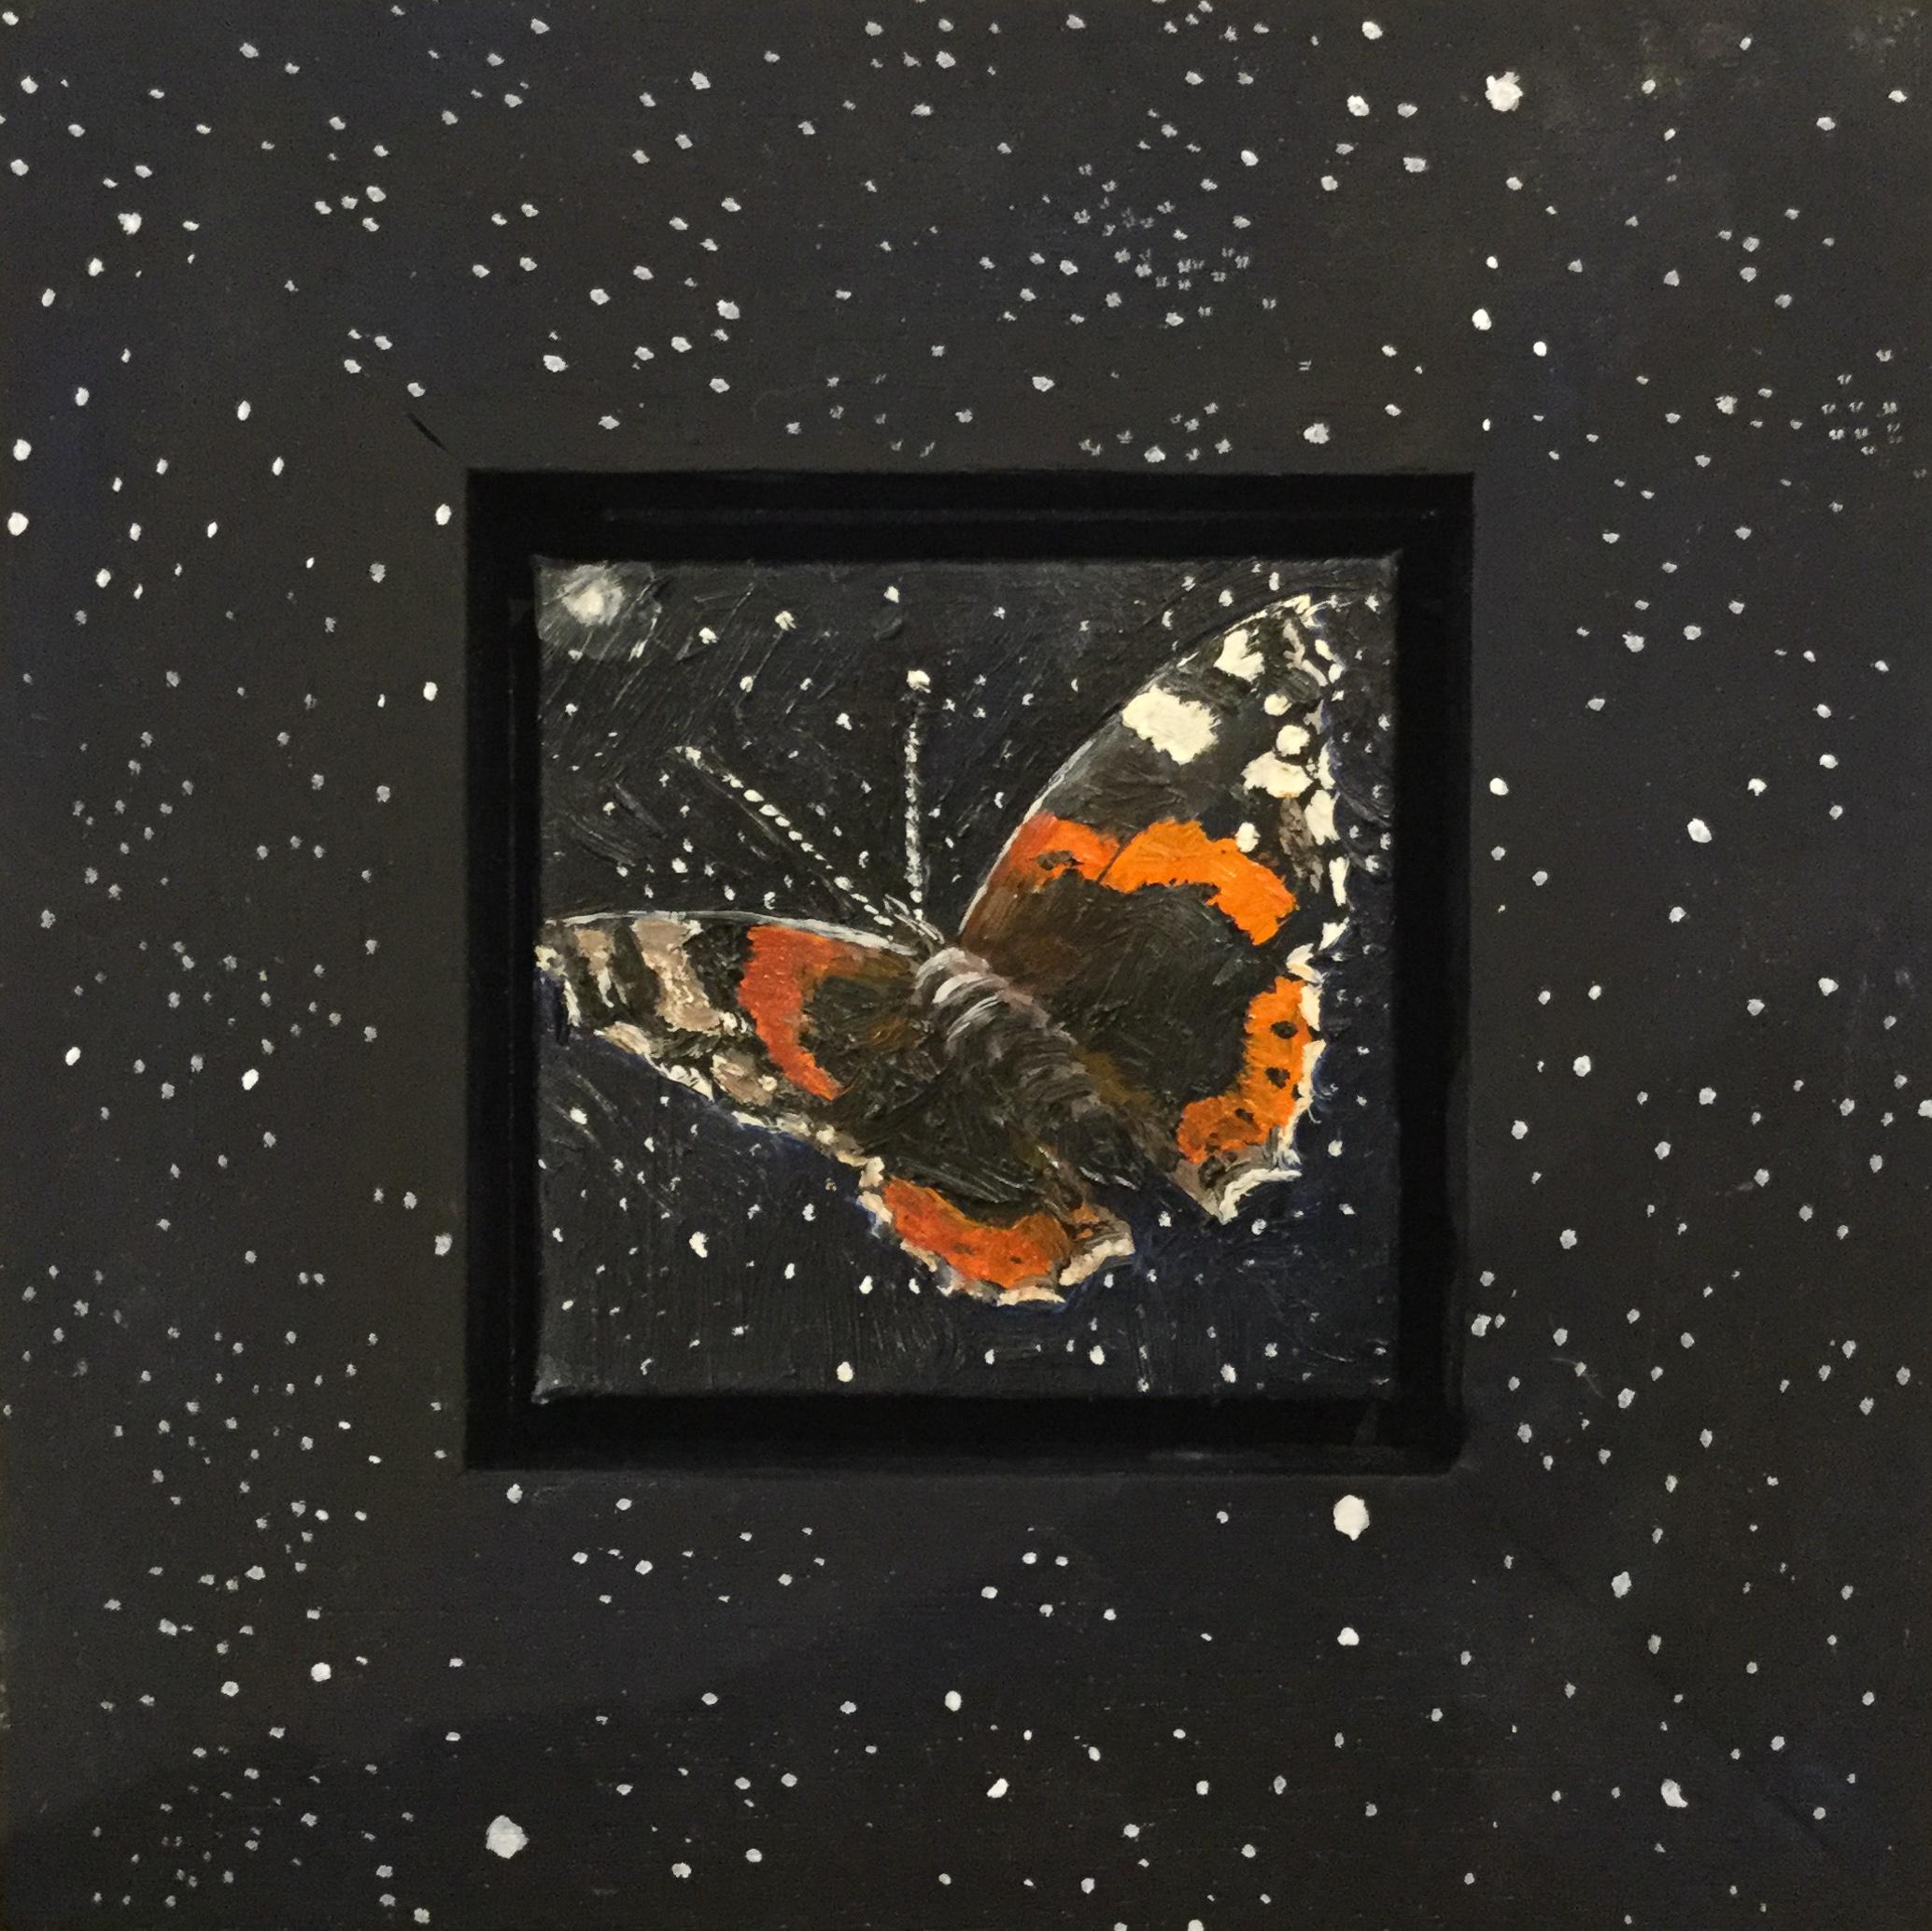 Red admiral by starlight